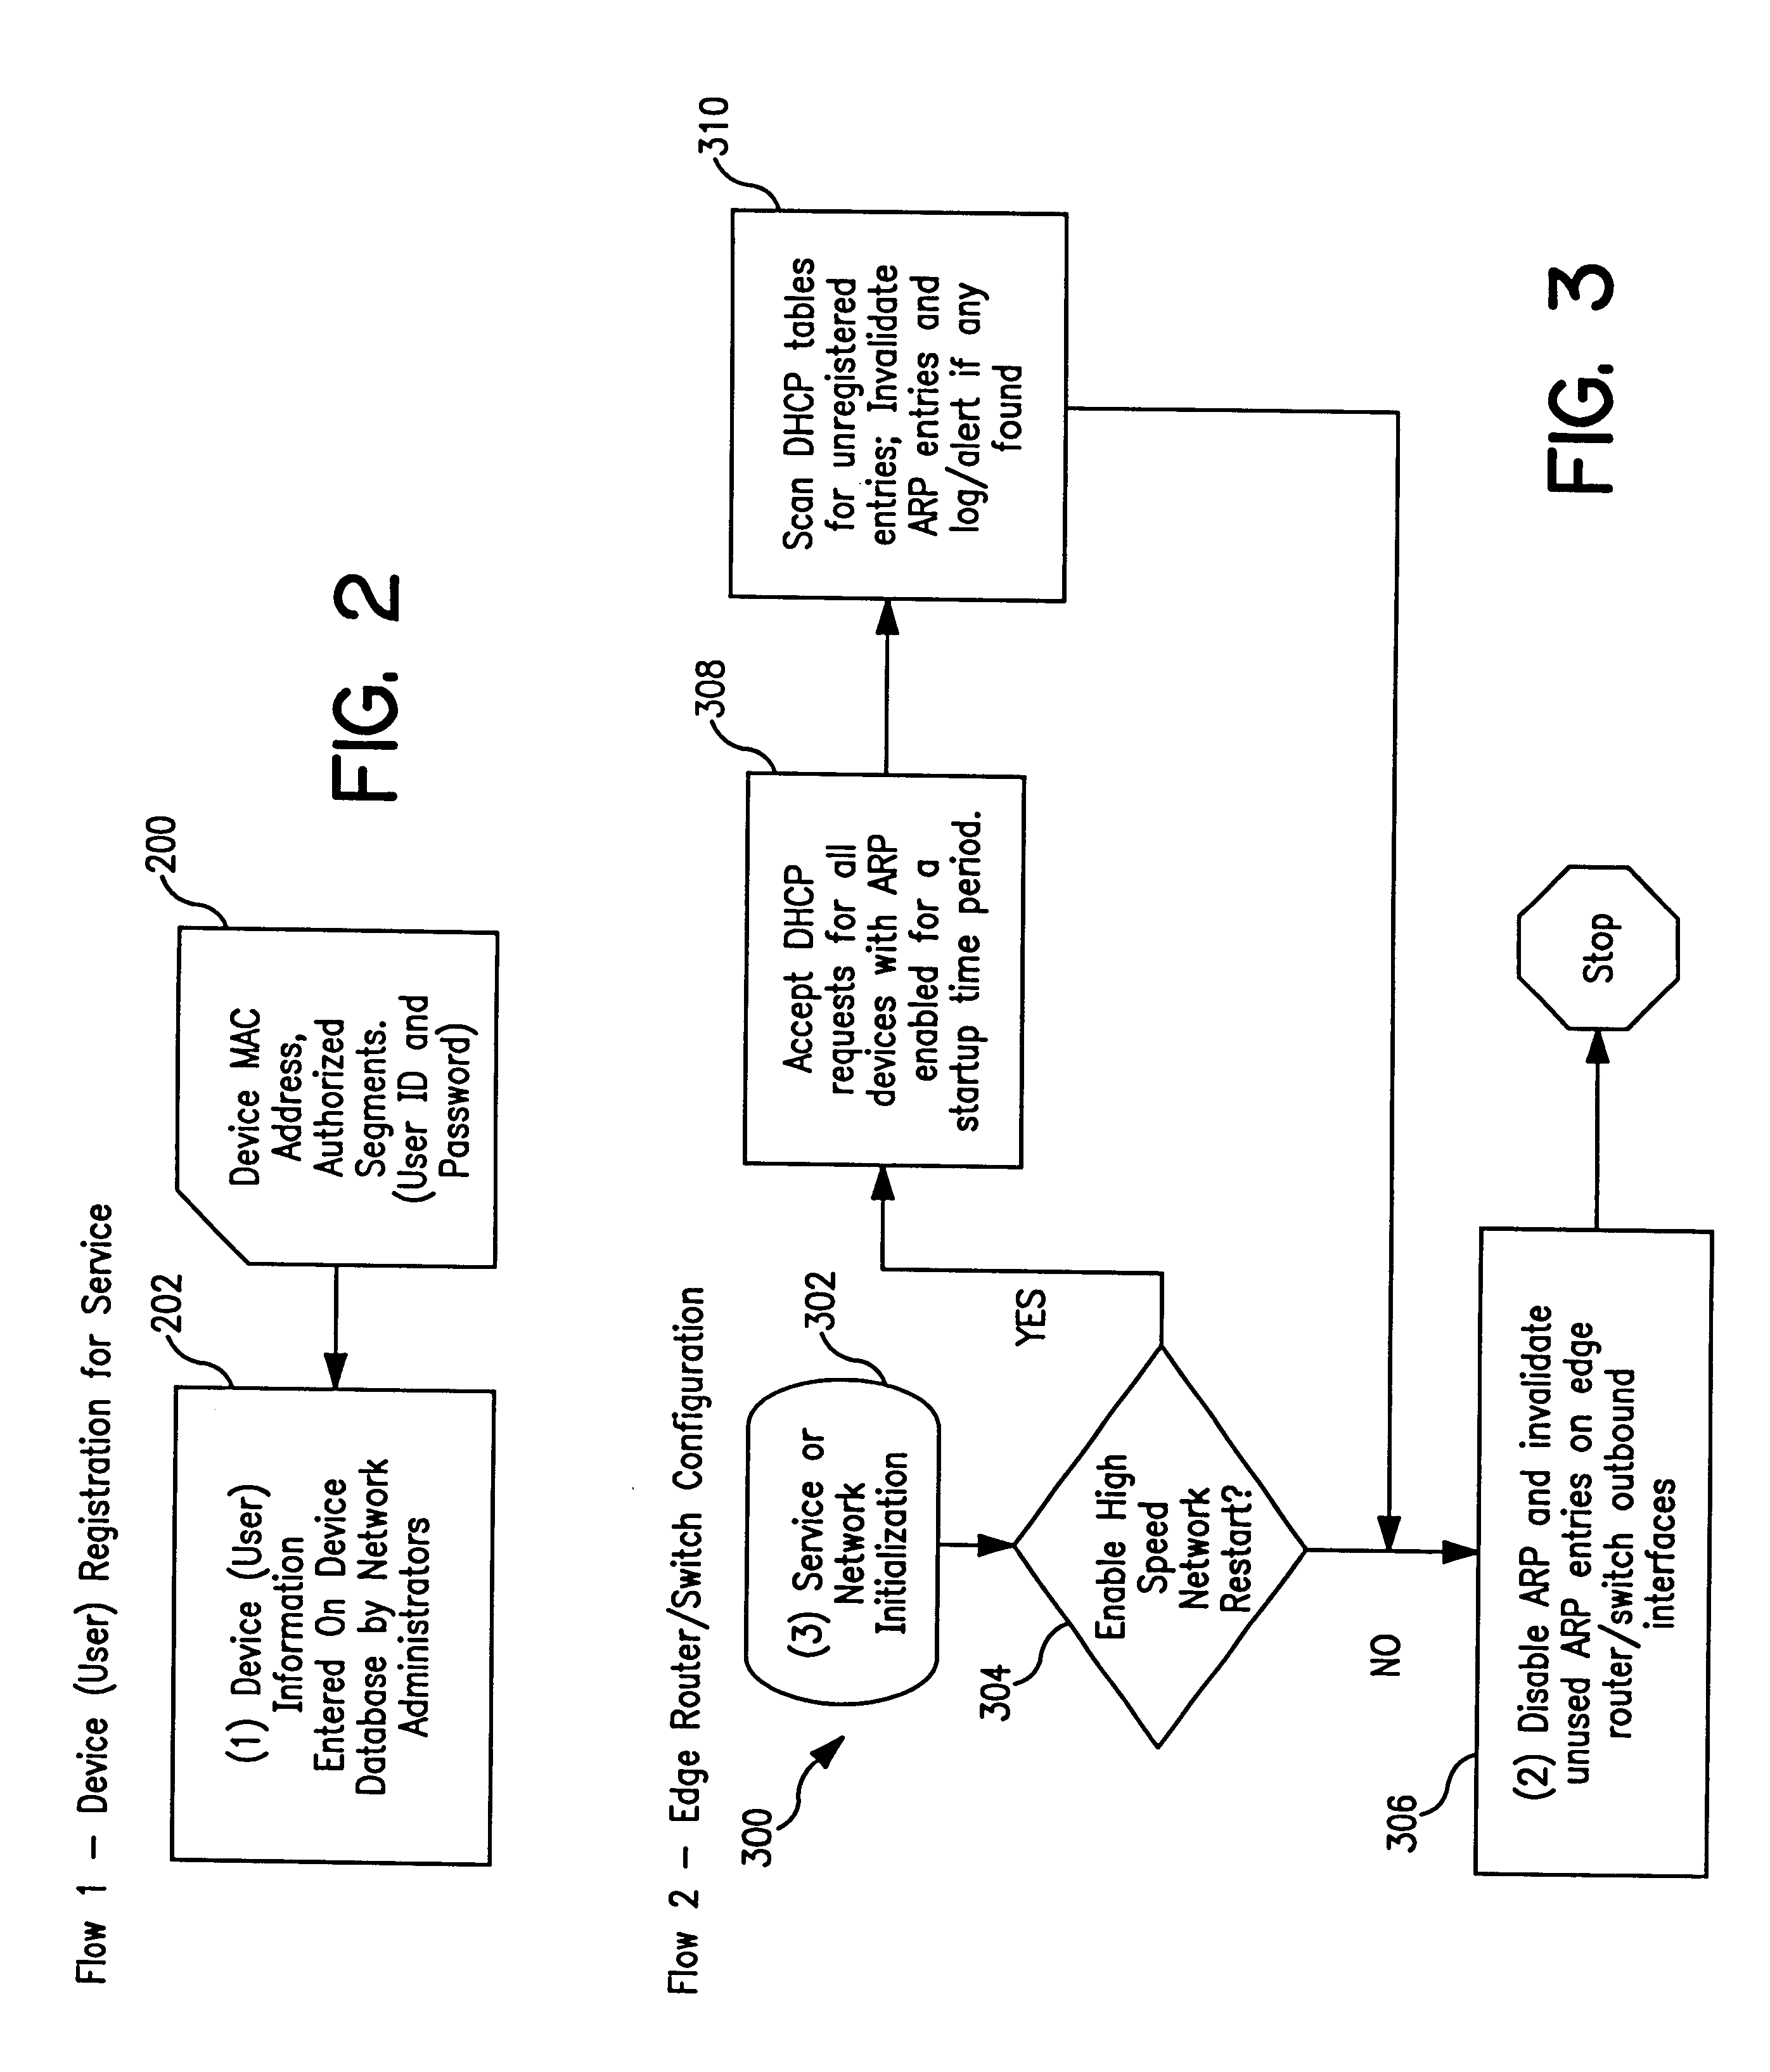 System and method for controlled access to shared-medium public and semi-public internet protocol (IP) networks